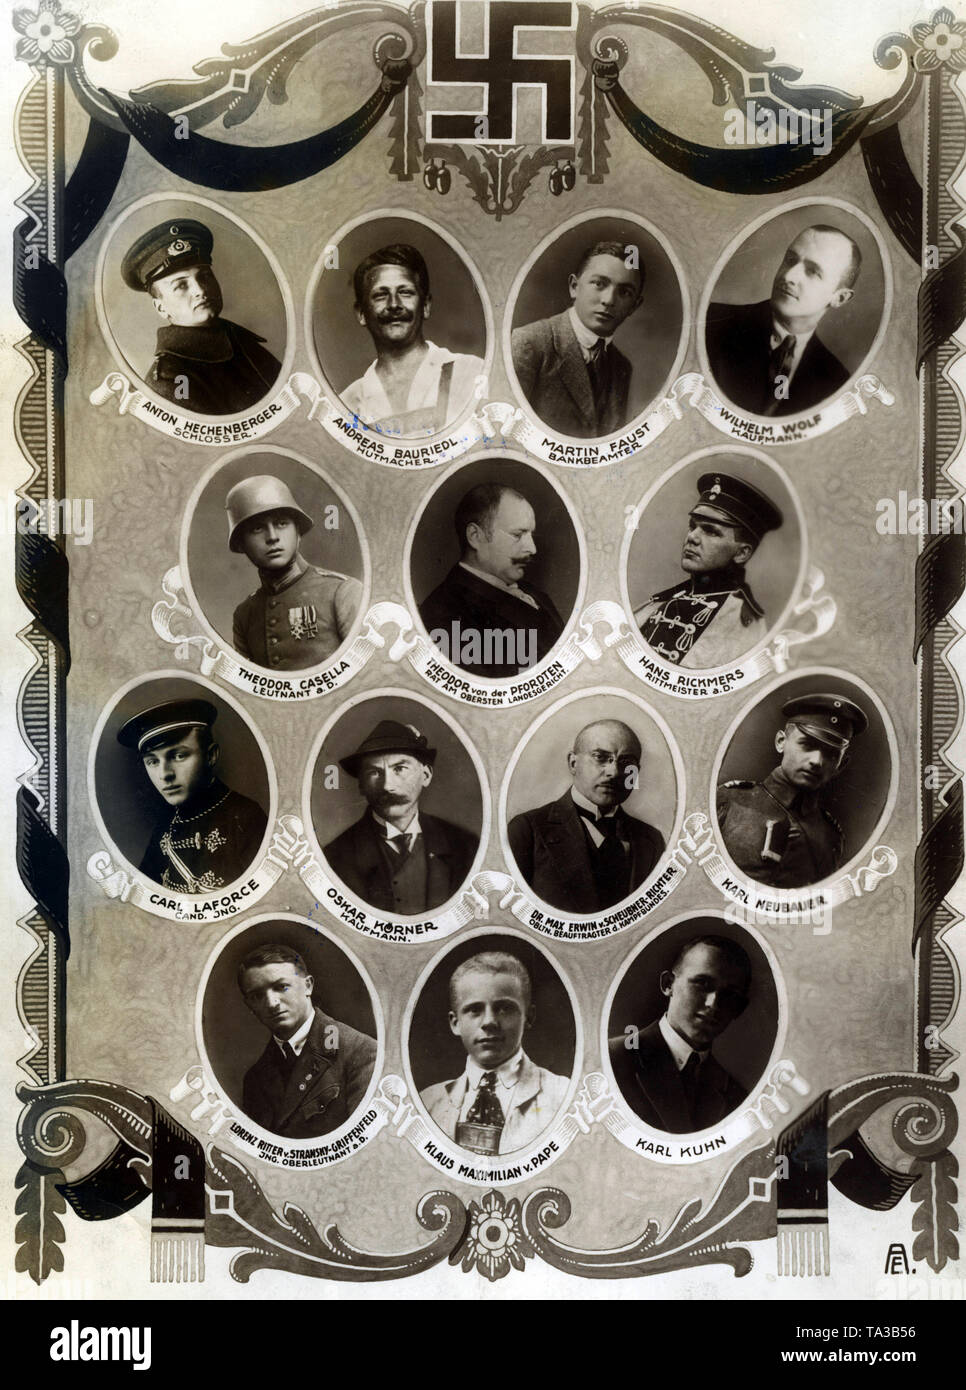 Collection of portraits of victims of the Hitler coup. From left to right: (first row) Anton Hechenberger, a locksmith, Andreas Bauriedl, a hatter, Martin Faust, a bank clerk, Wilhelm Wolf, a merchant (), (second row) Theodor Casella (Leutnat a.D.), Theodor von der Pfordten, a district court counselor, Hans Rickmers, a former cavalry captain (3rd row), Carl Laforce, Cand. Ing., Oskar Koerner, a merchant, Dr. Max Erwin von Scheubner-Richter, Karl Neubauer (4th row), Lorenz Ritter von Stansky-Griffenfeld, Ing. Oberleutnant, Klaus Maximilian von Pape, Karl Kuhn. Stock Photo